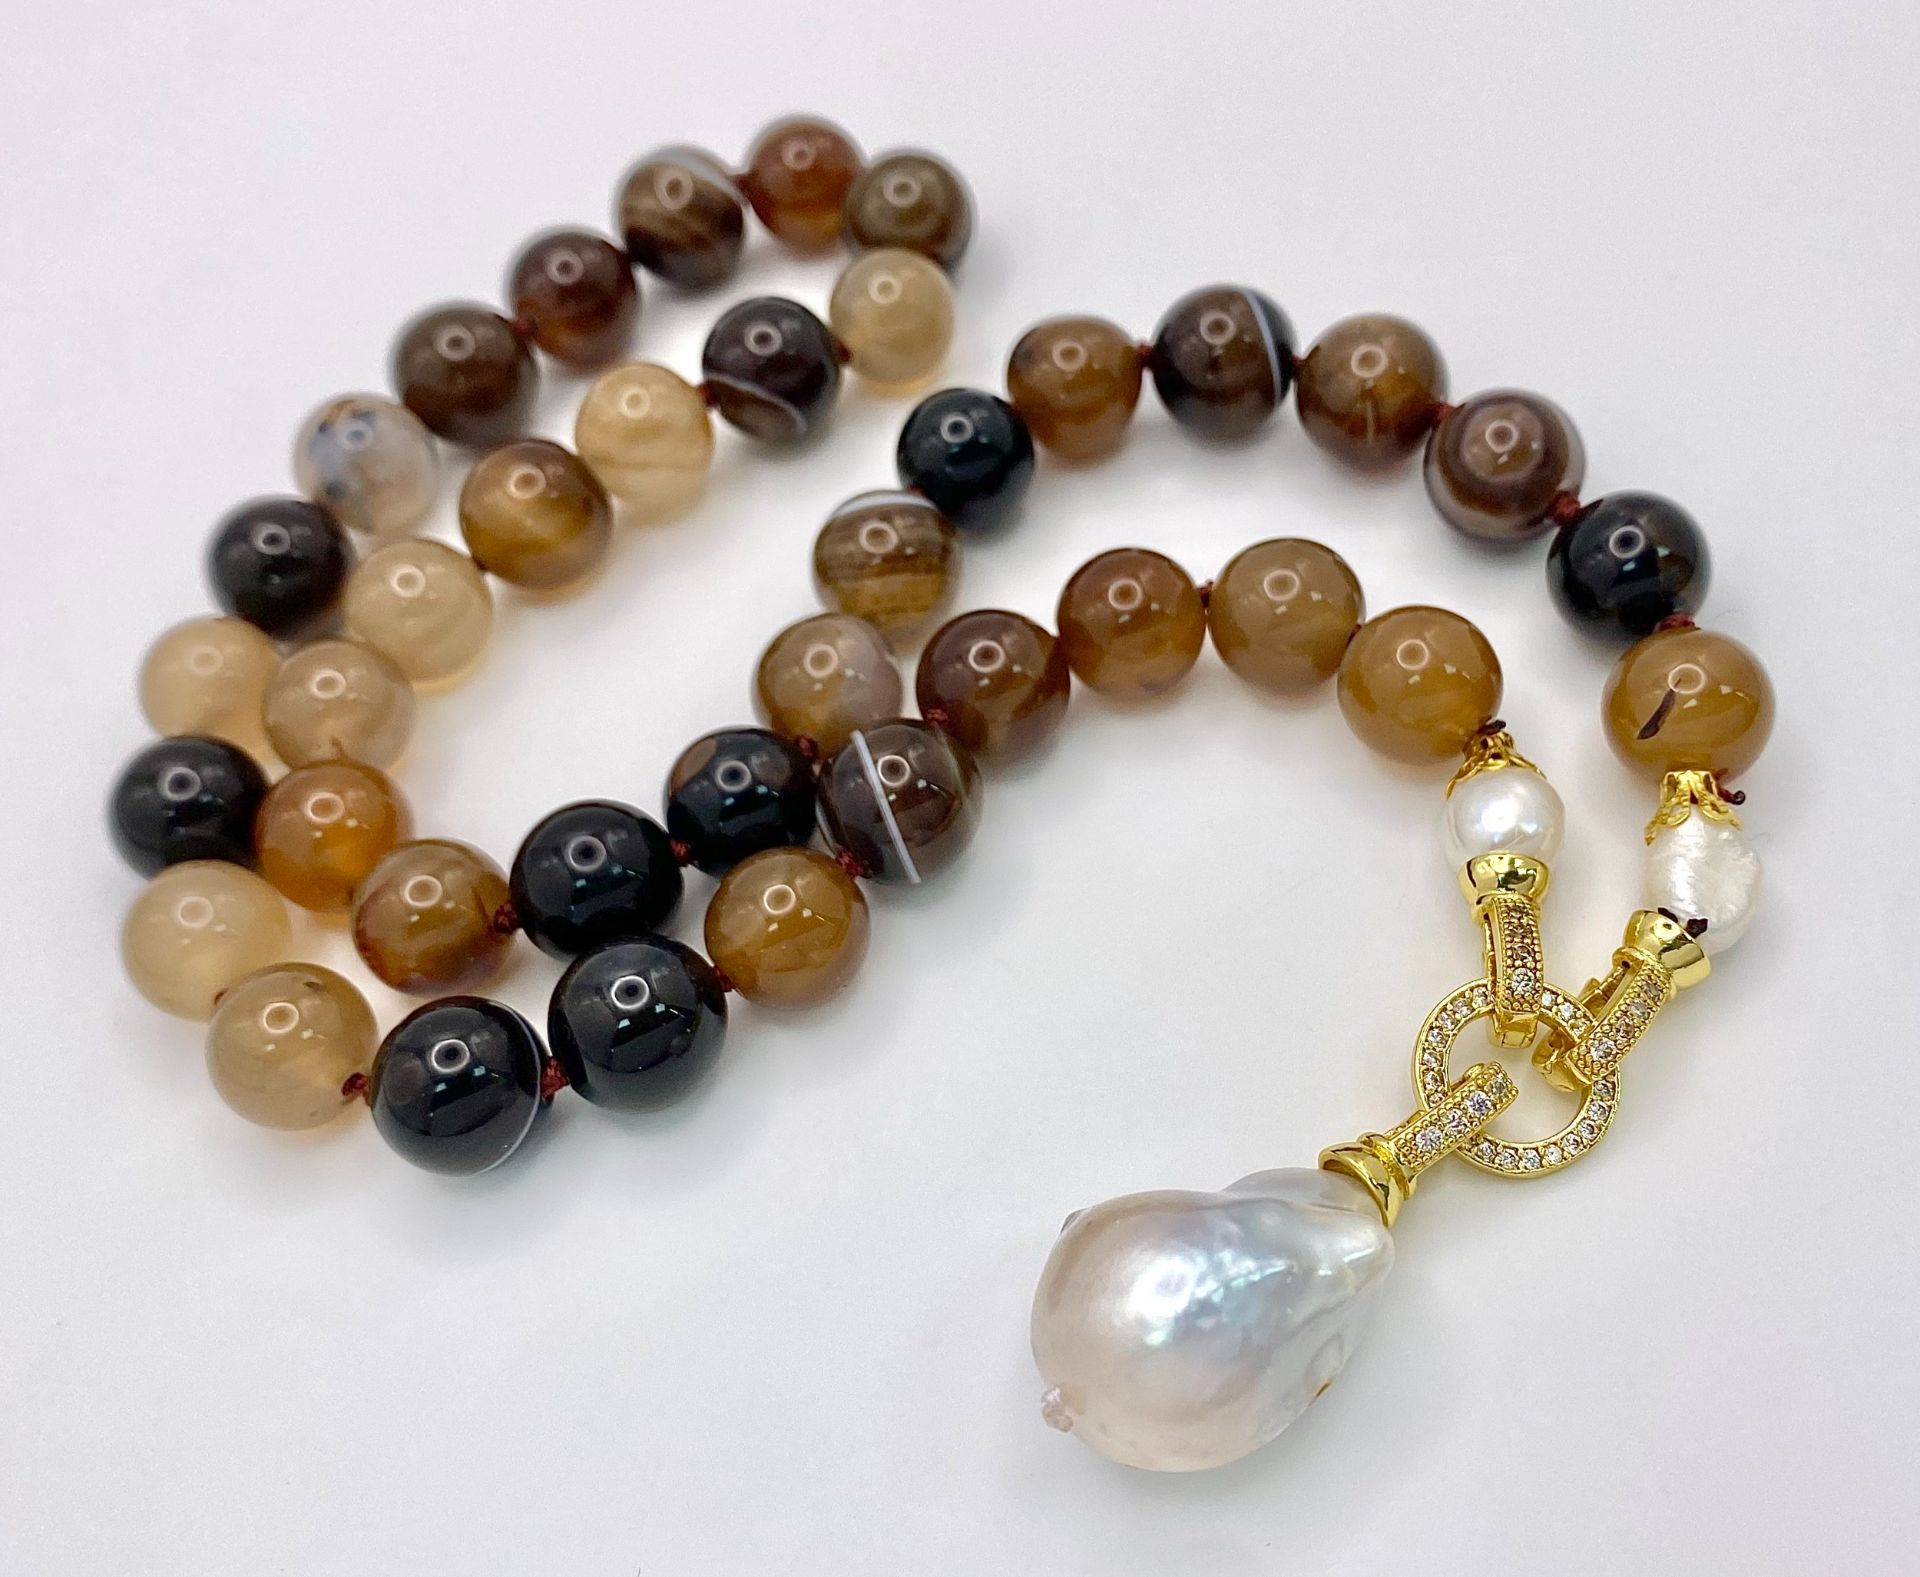 A Brown Stripe Agate Beaded Necklace with Hanging Baroque Keisha Pearl Pendant. 12mm beads. Gilded - Image 2 of 3